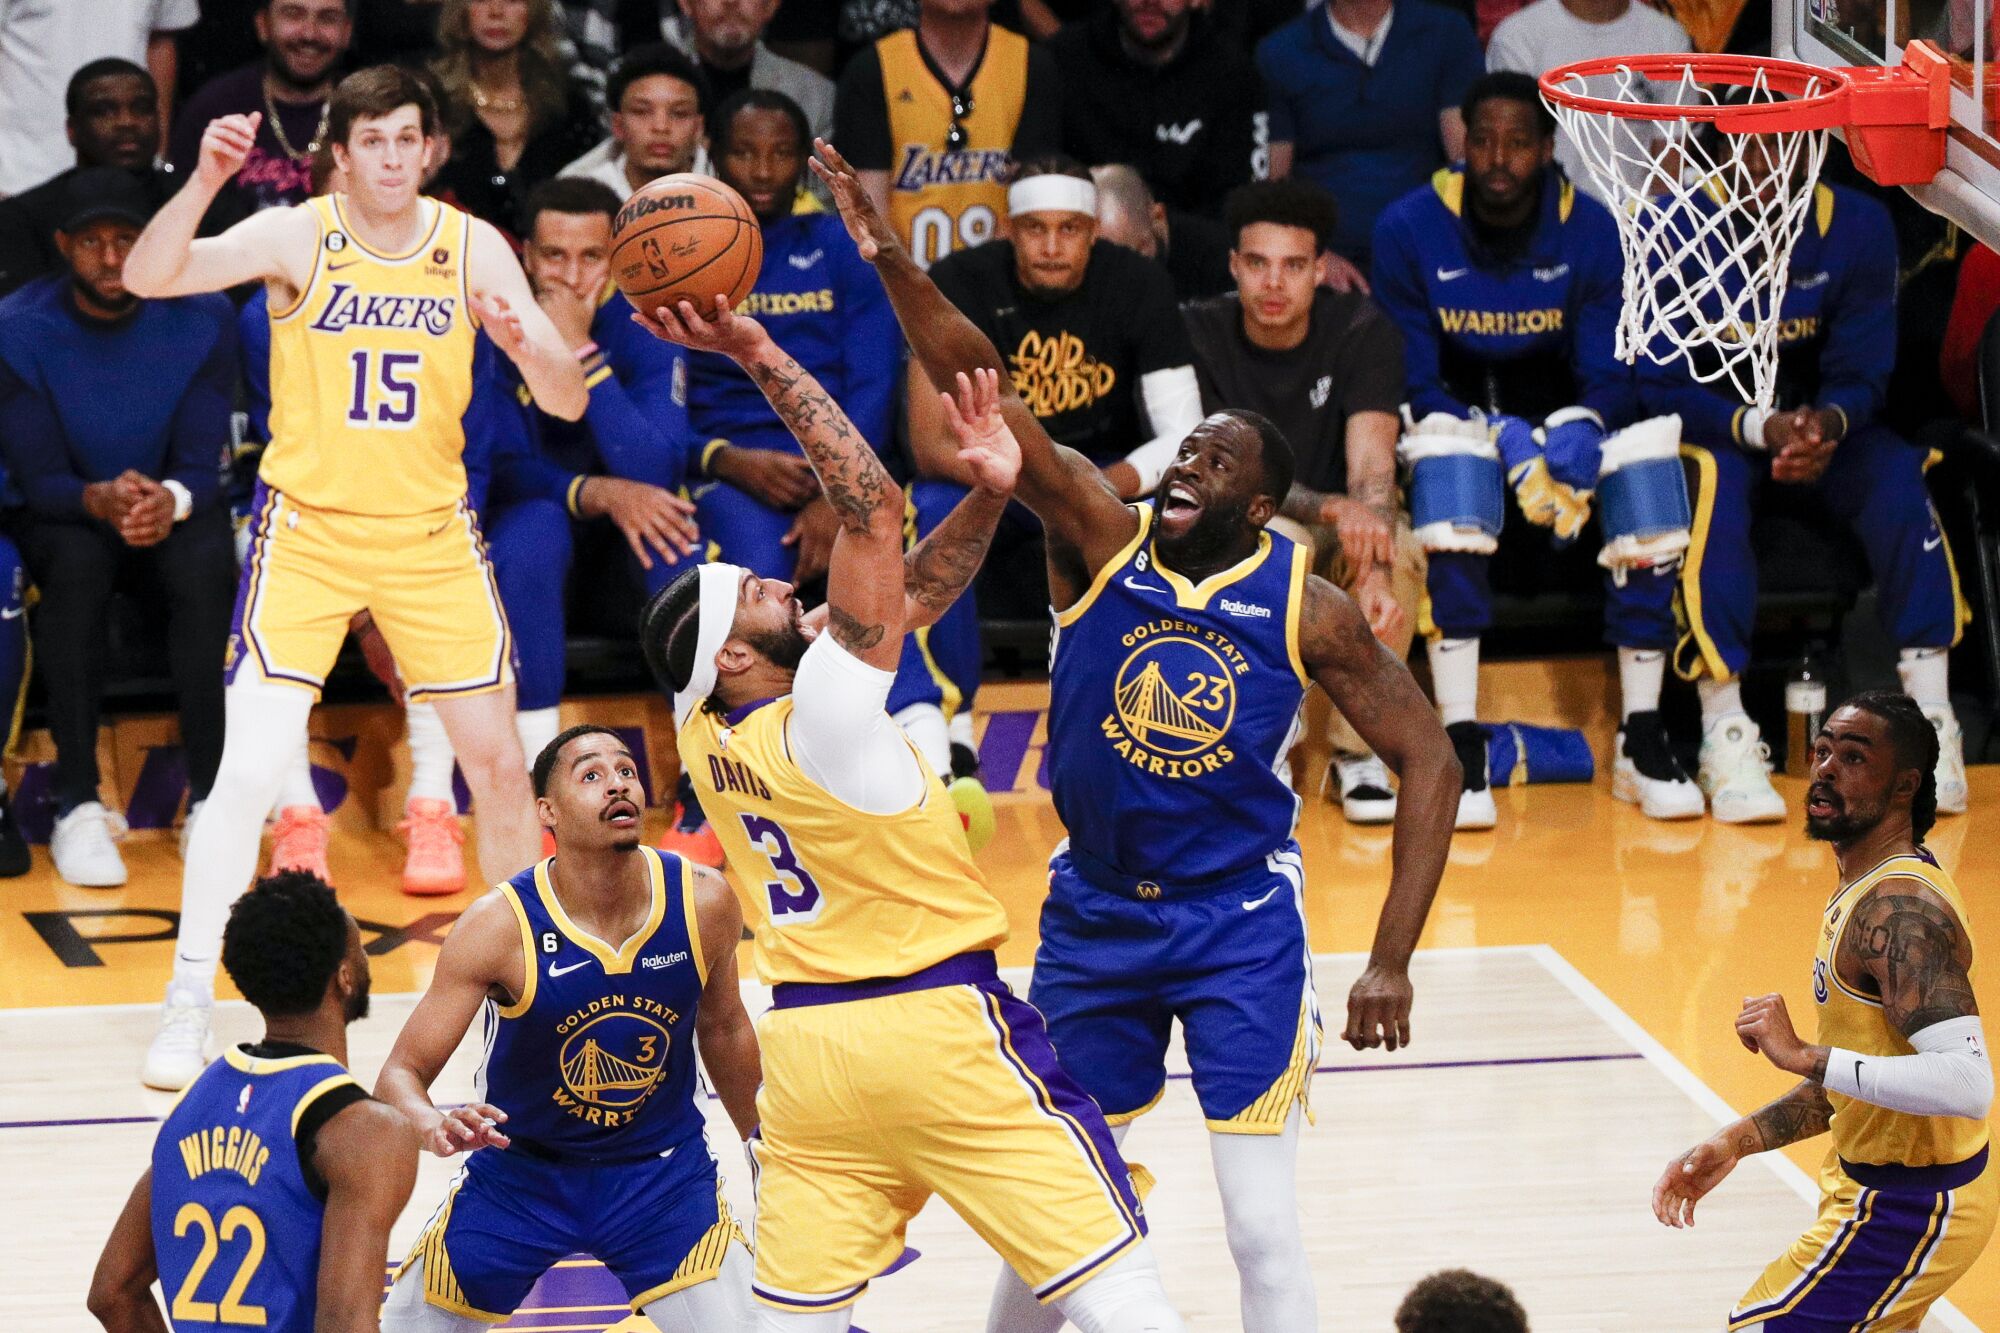 Lakers forward Anthony Davis, center, is fouled by Warriors forward Draymond Green, right, on a shot attempt in the lane.